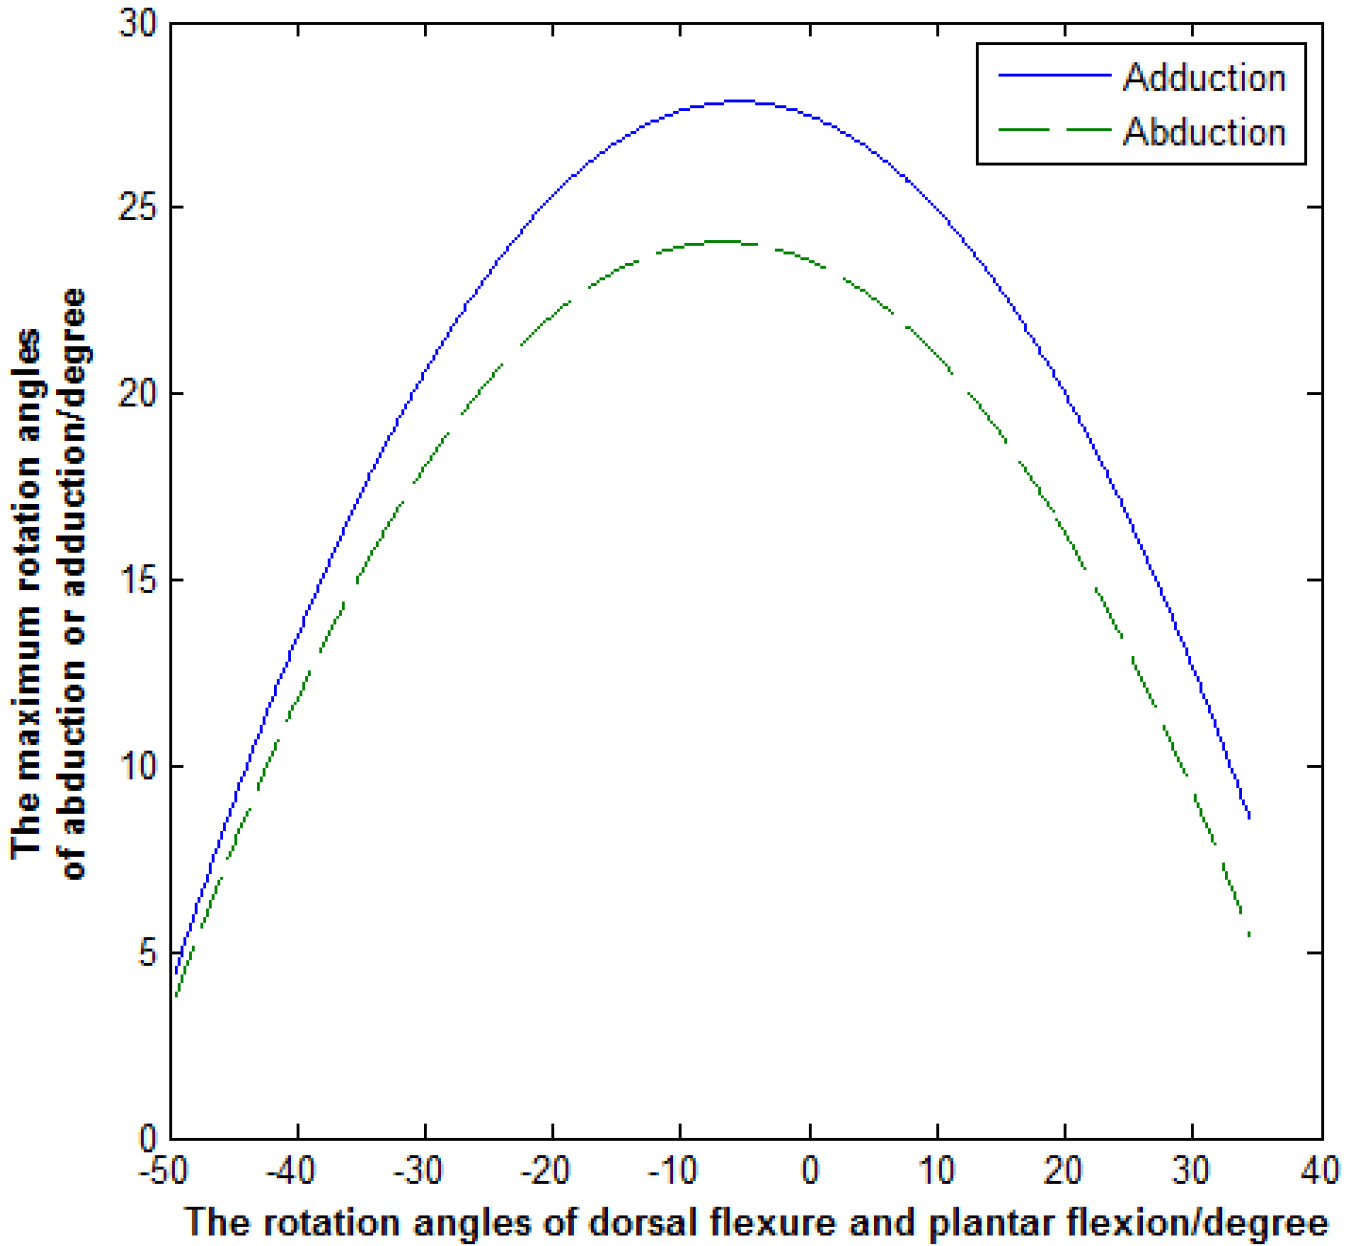 Comparison of adduction and abduction.